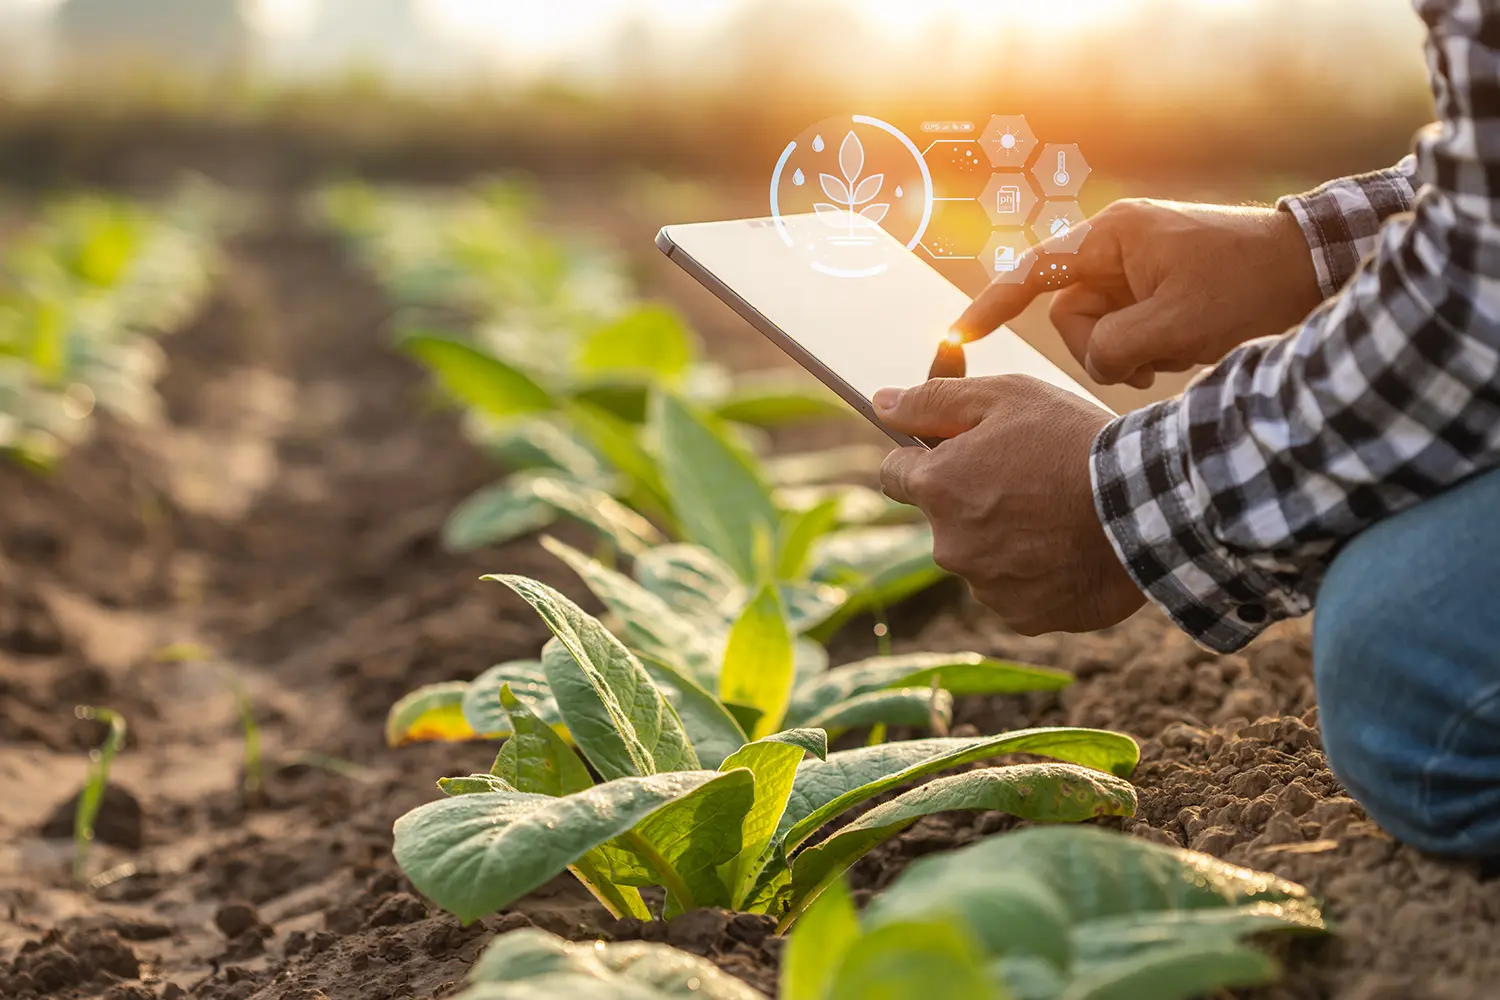 Asian farmer working in the tobacco field. Man is examining and using digital tablet to management, planning or analyze on tobacco plant after planting. Technology for agriculture Concept